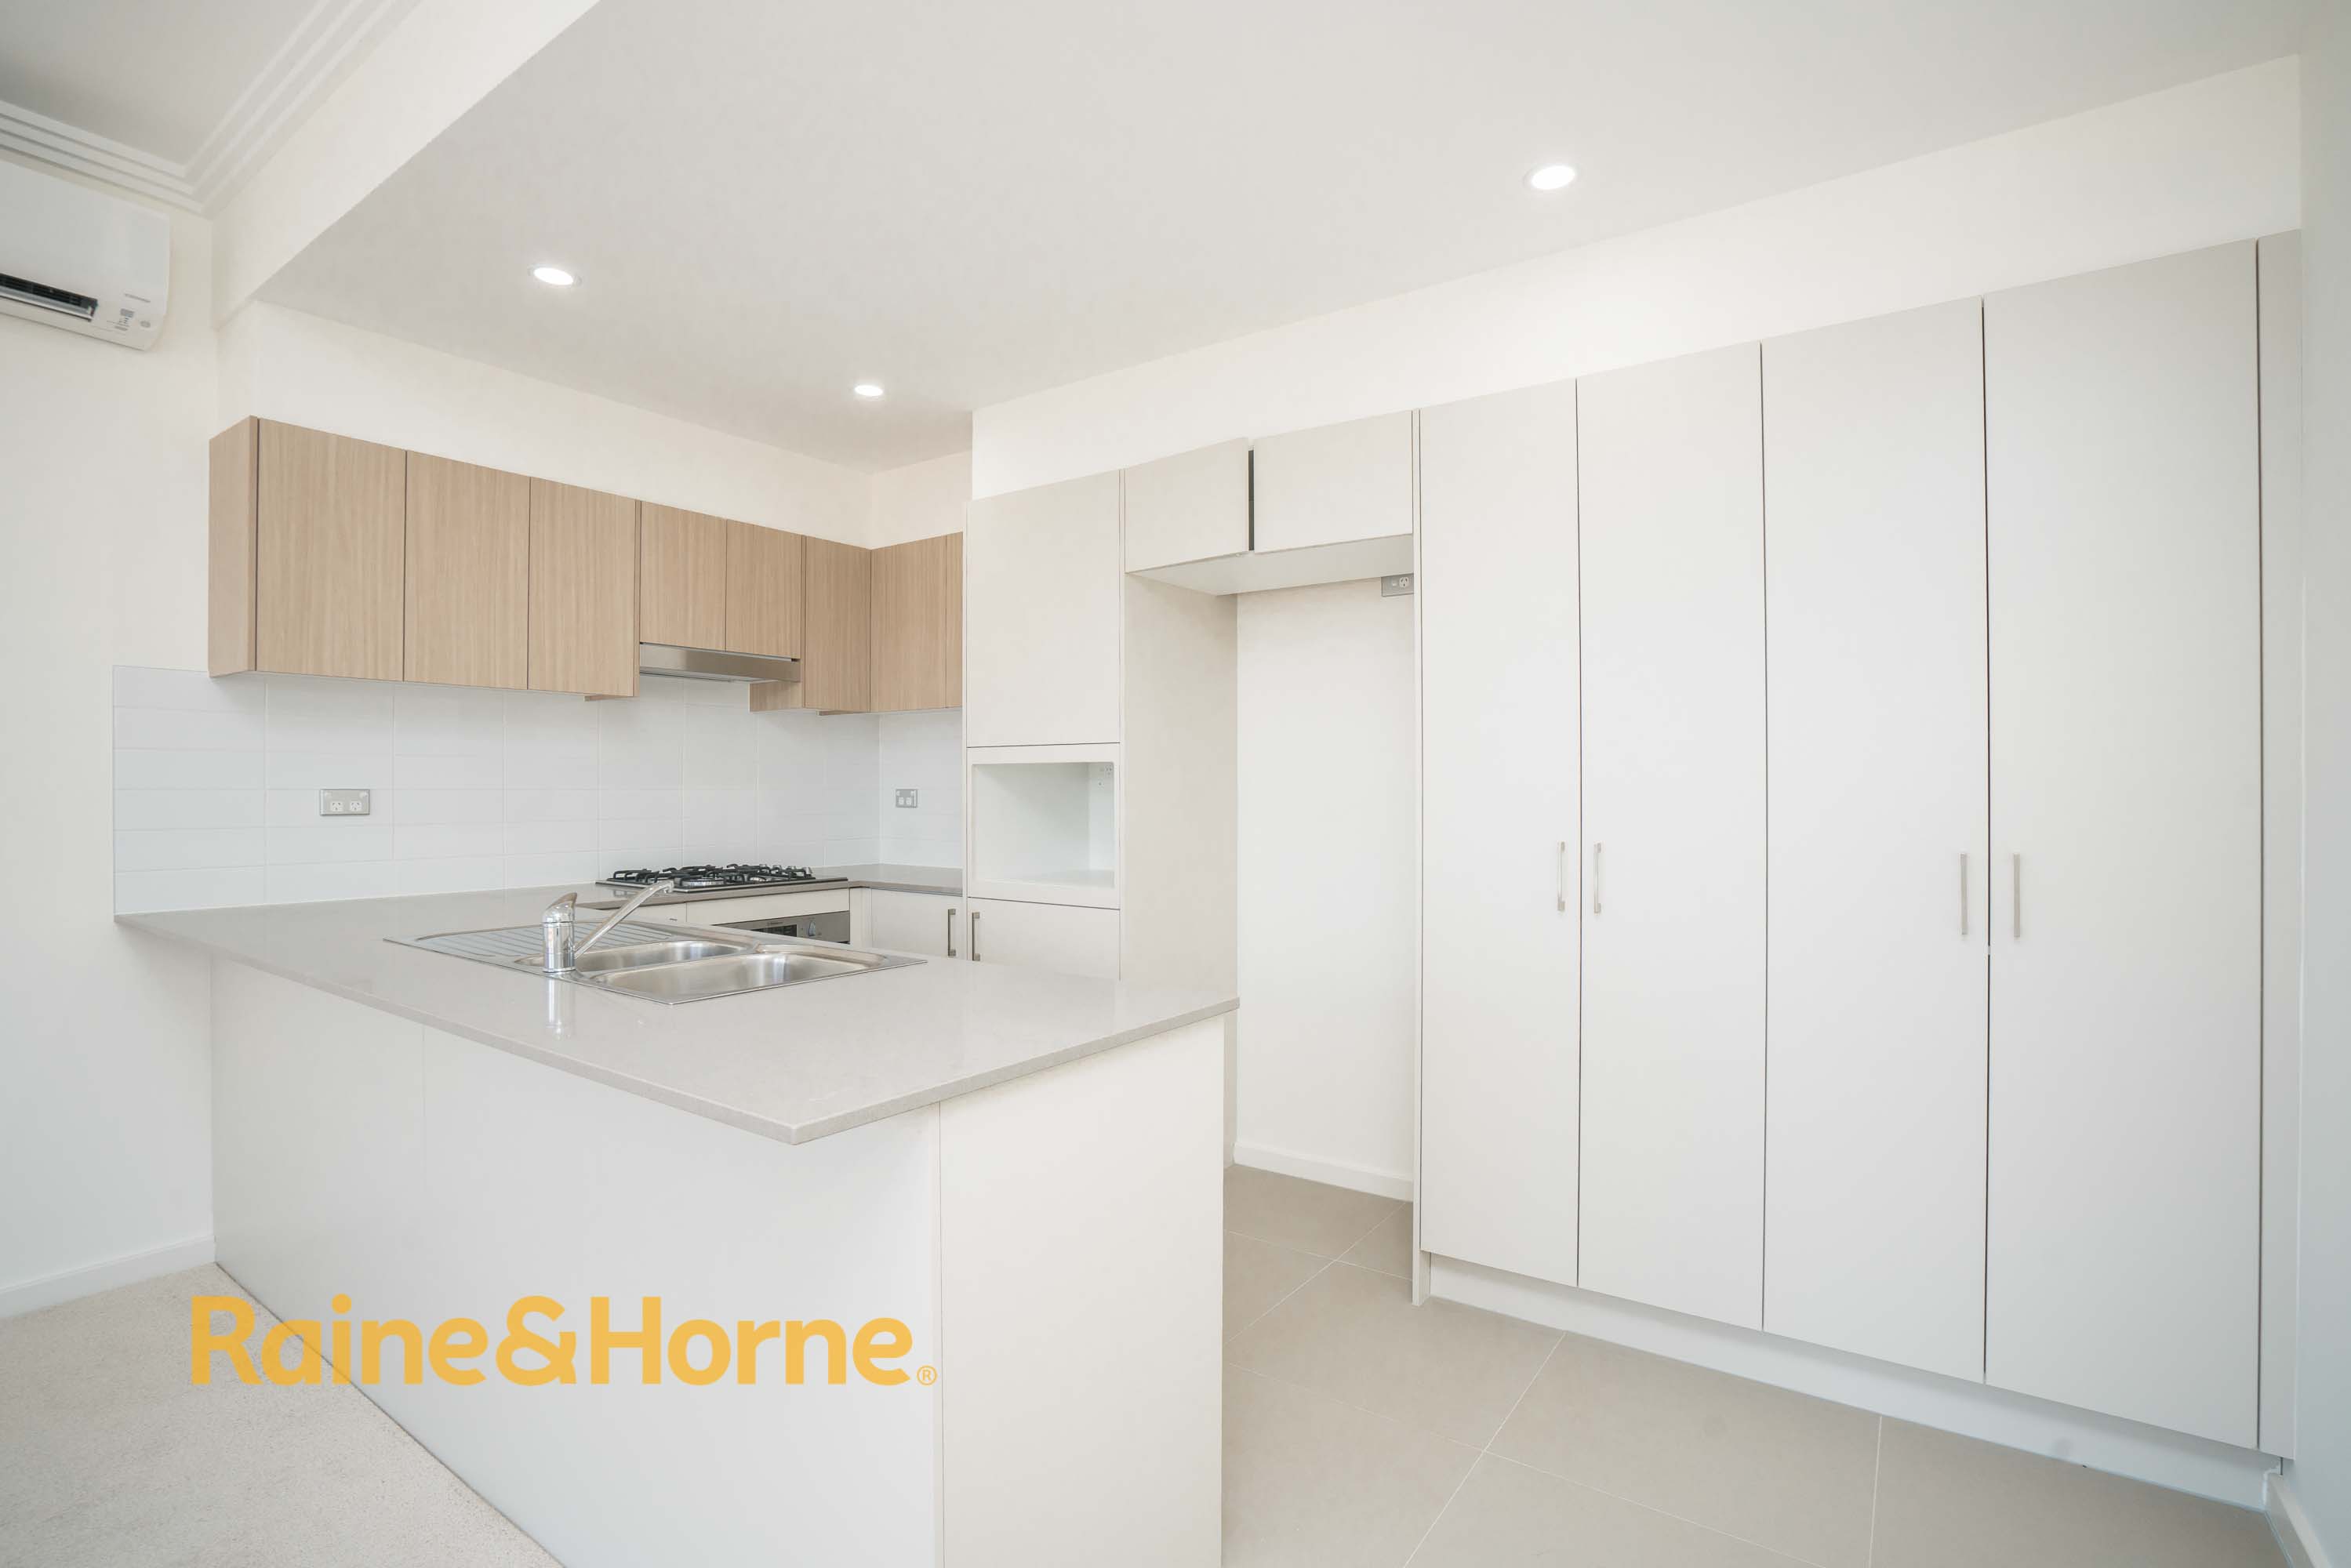 Leased Unit A506 48 56 Derby Street Kingswood Nsw 2747 Jul 11 2019 Homely